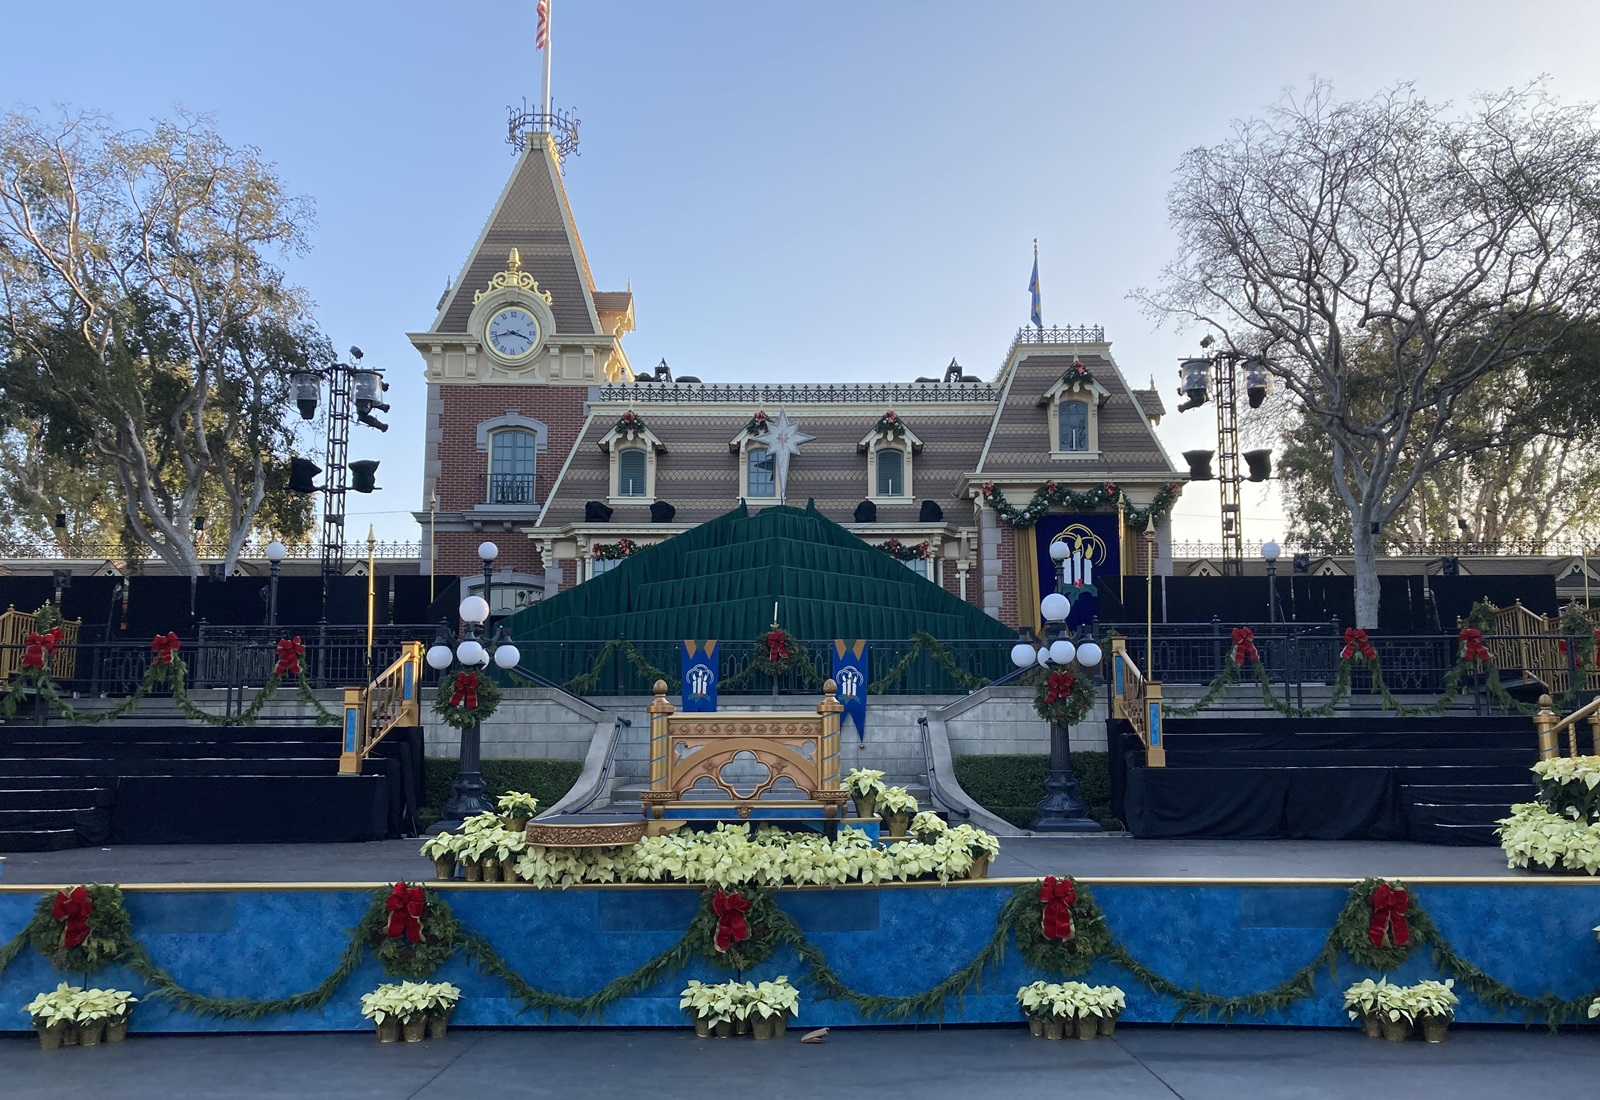 Disneyland Candlelight Processional Dates Announced Social Card